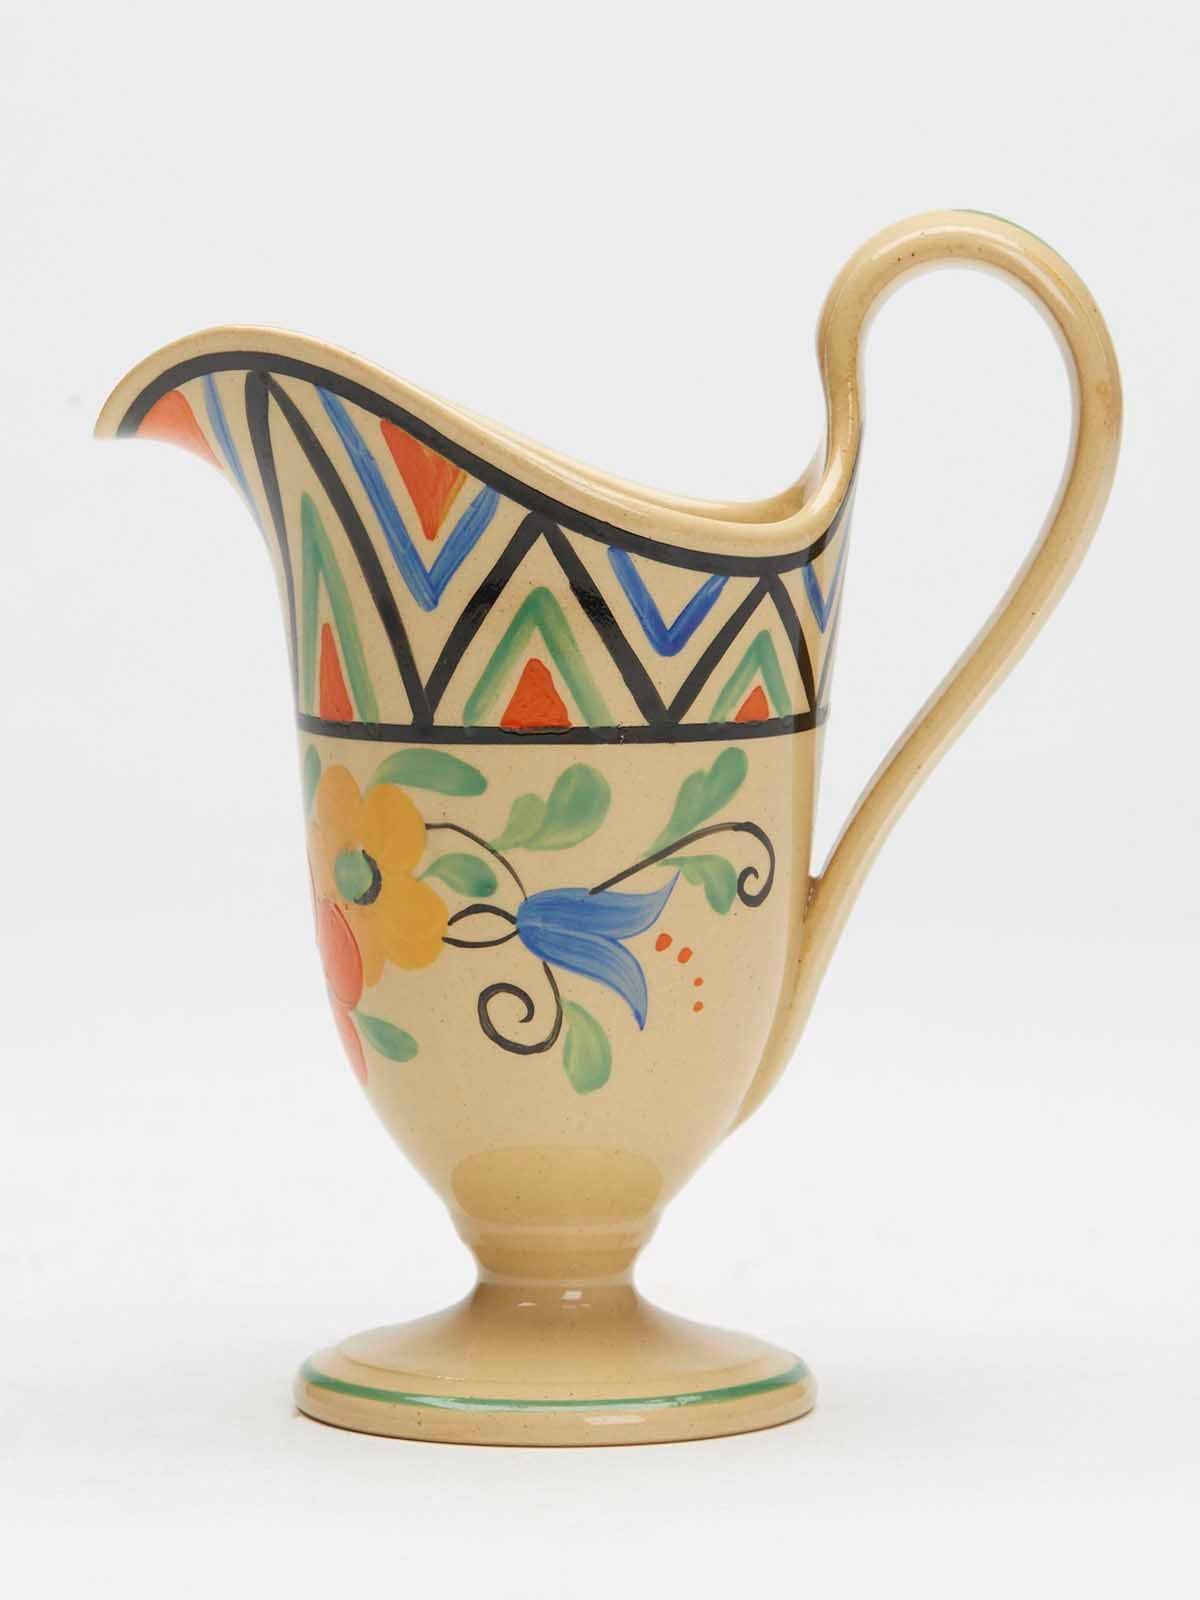 A very fine and stylish Art Deco Wedgwood floral painted cream jug by renowned designed Millicent (Millie) Jane Taplin (British, 1902-1980) and dating from around 1930. 

Millie was a renowned painter of ceramics who was trained by Alfred and